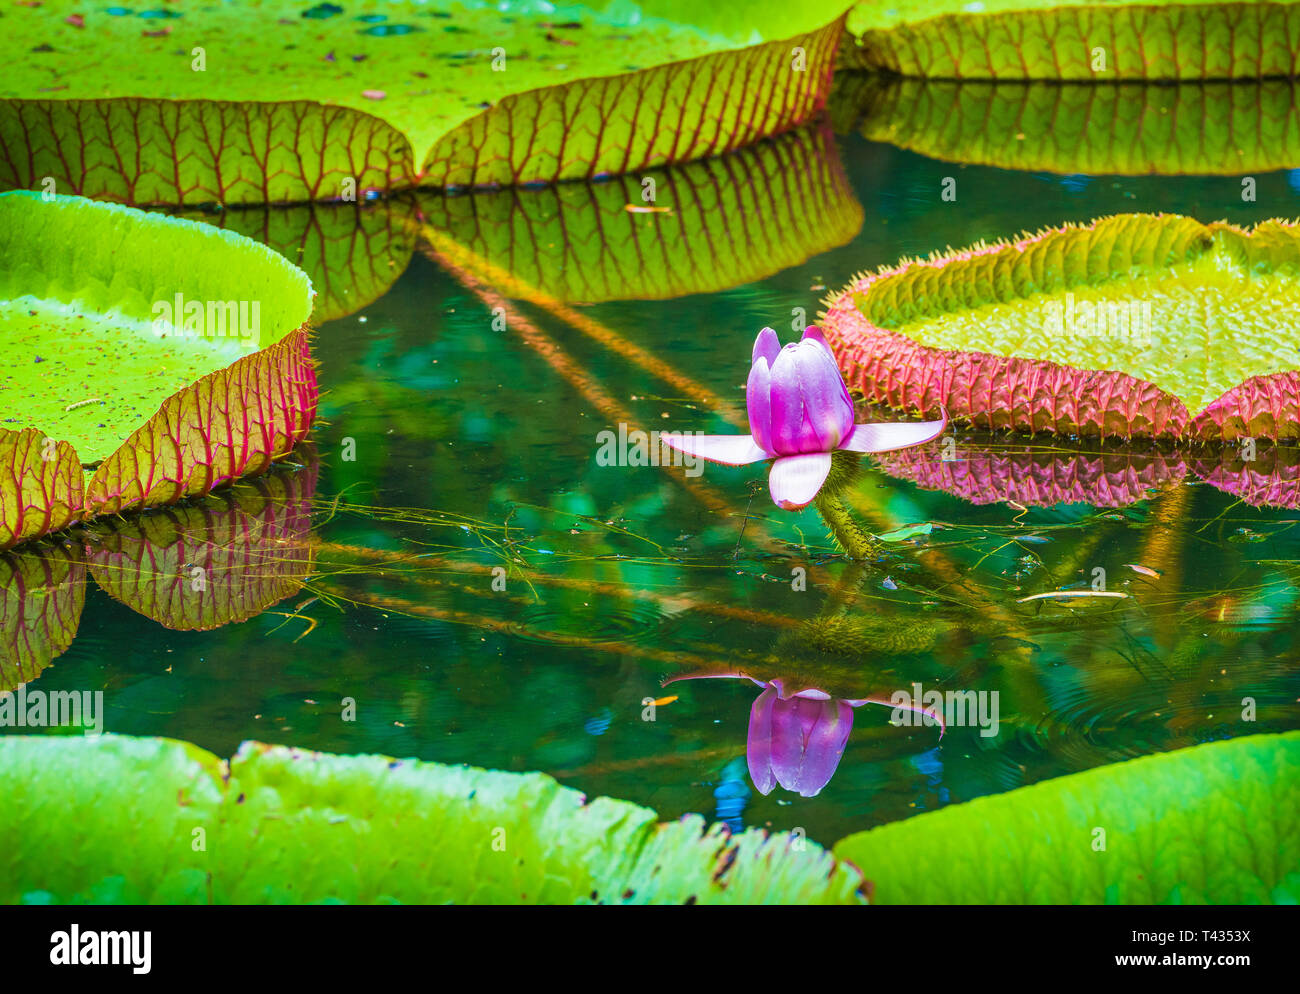 Water lily, Victoria amazonica lotus flower plant.  Pamplemousses Botanical Garden, Mauritius Stock Photo